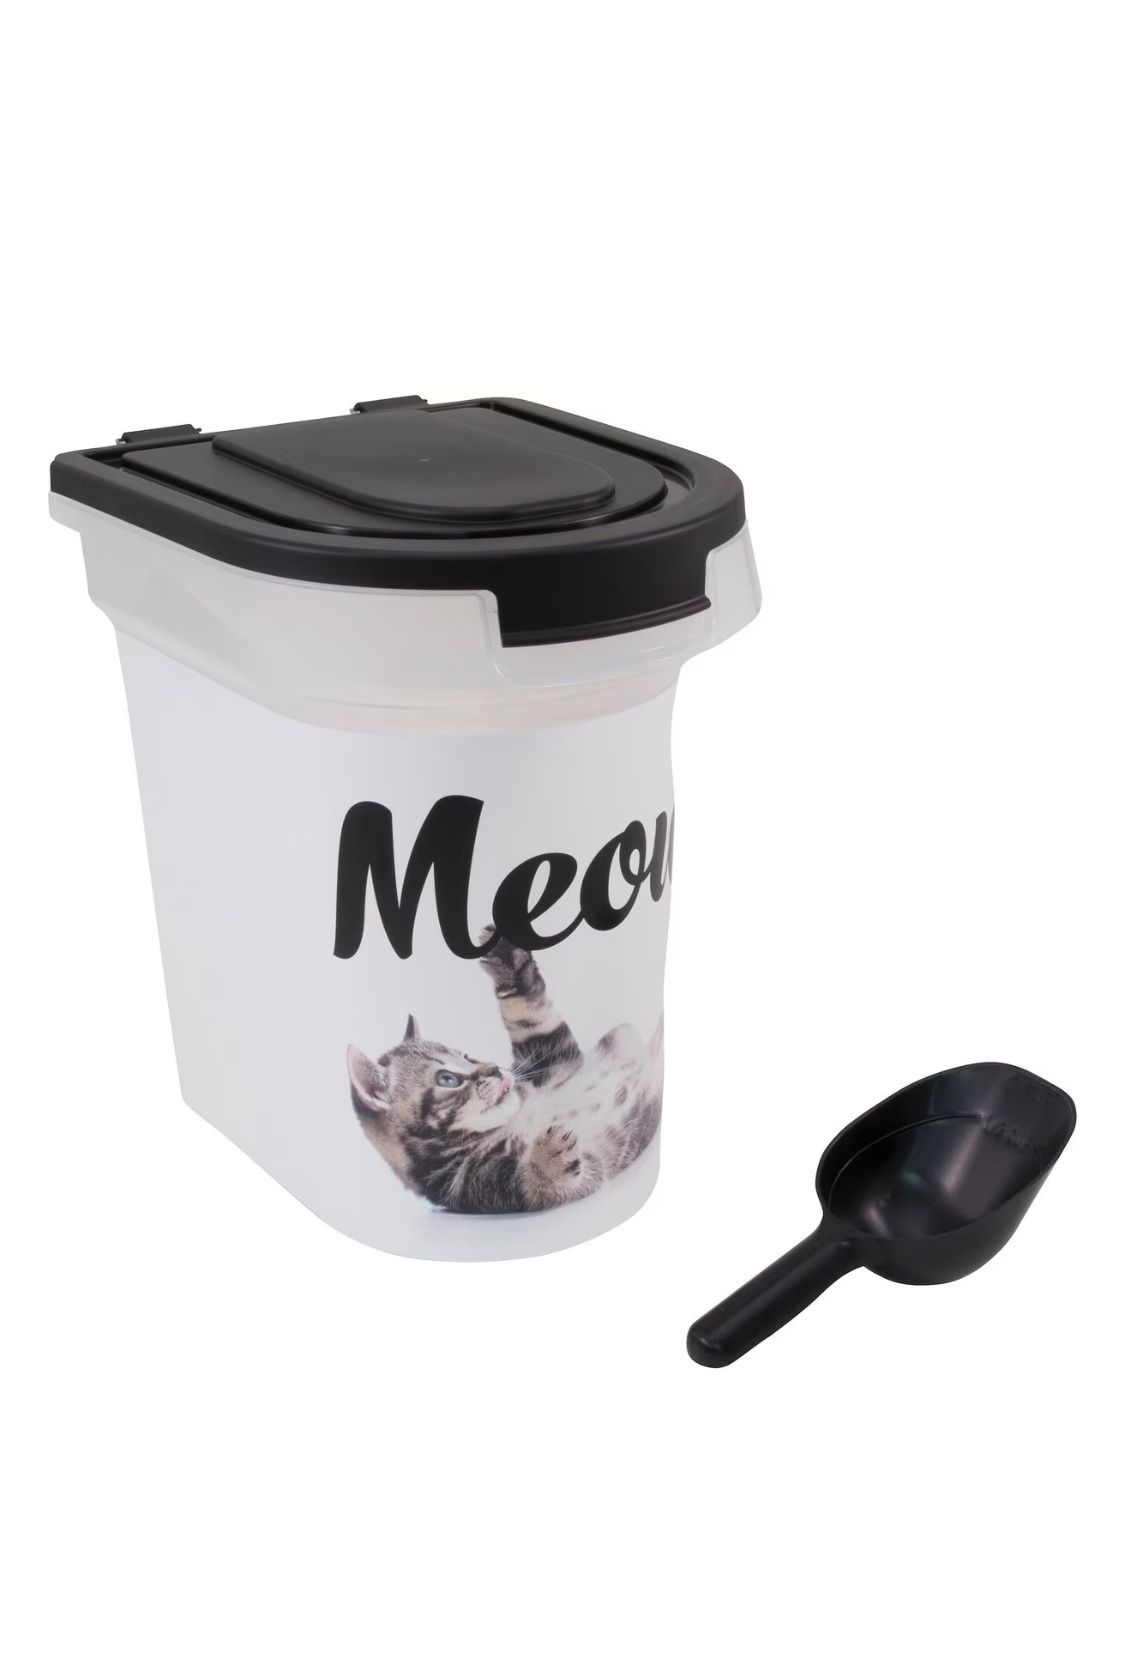 Paw Prints Meow Kitty Pet Food Storage Container